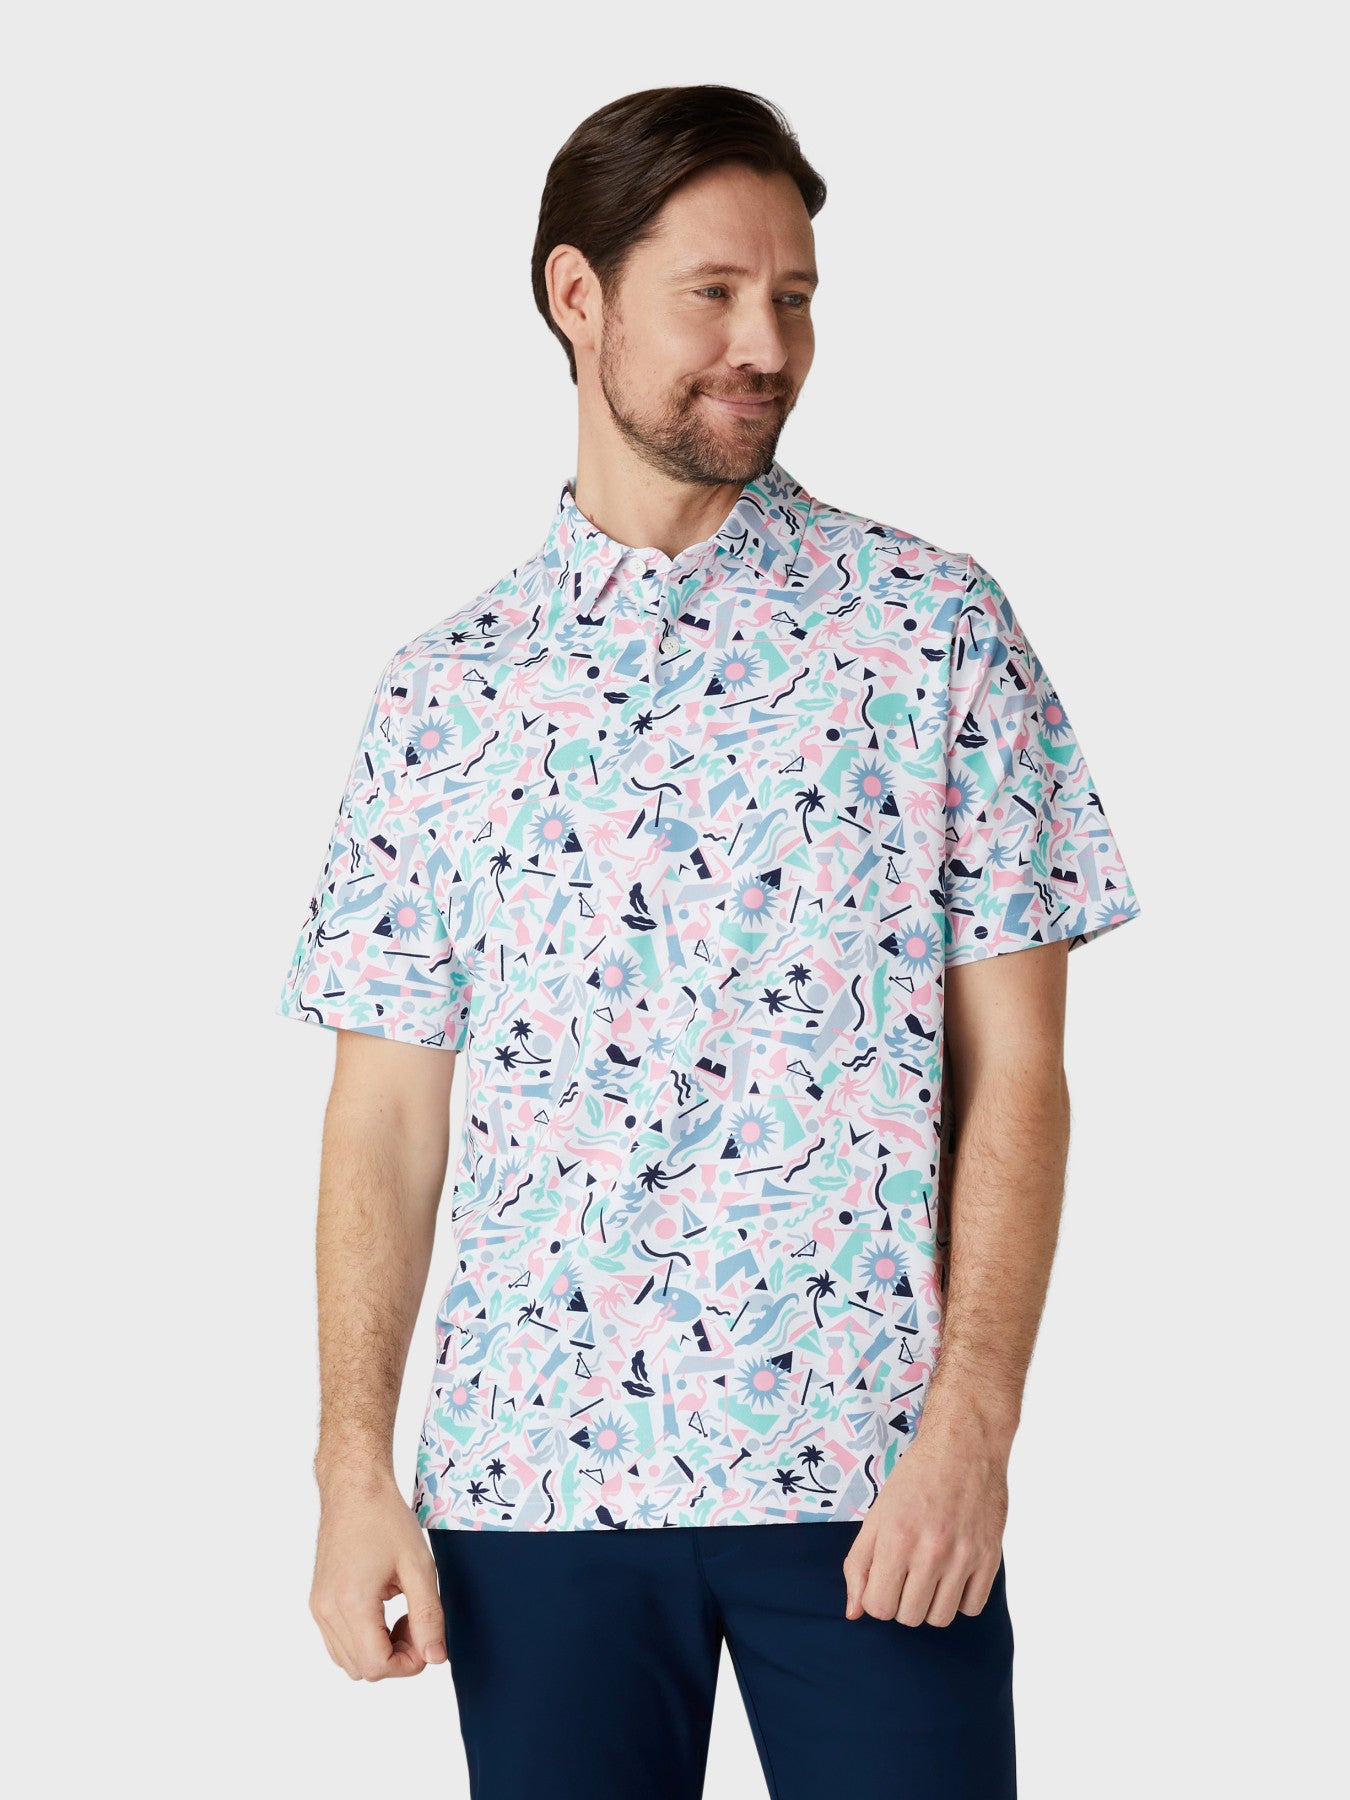 View Short Sleeve Florida Abstract Novelty Print Polo Shirt In Bright White information